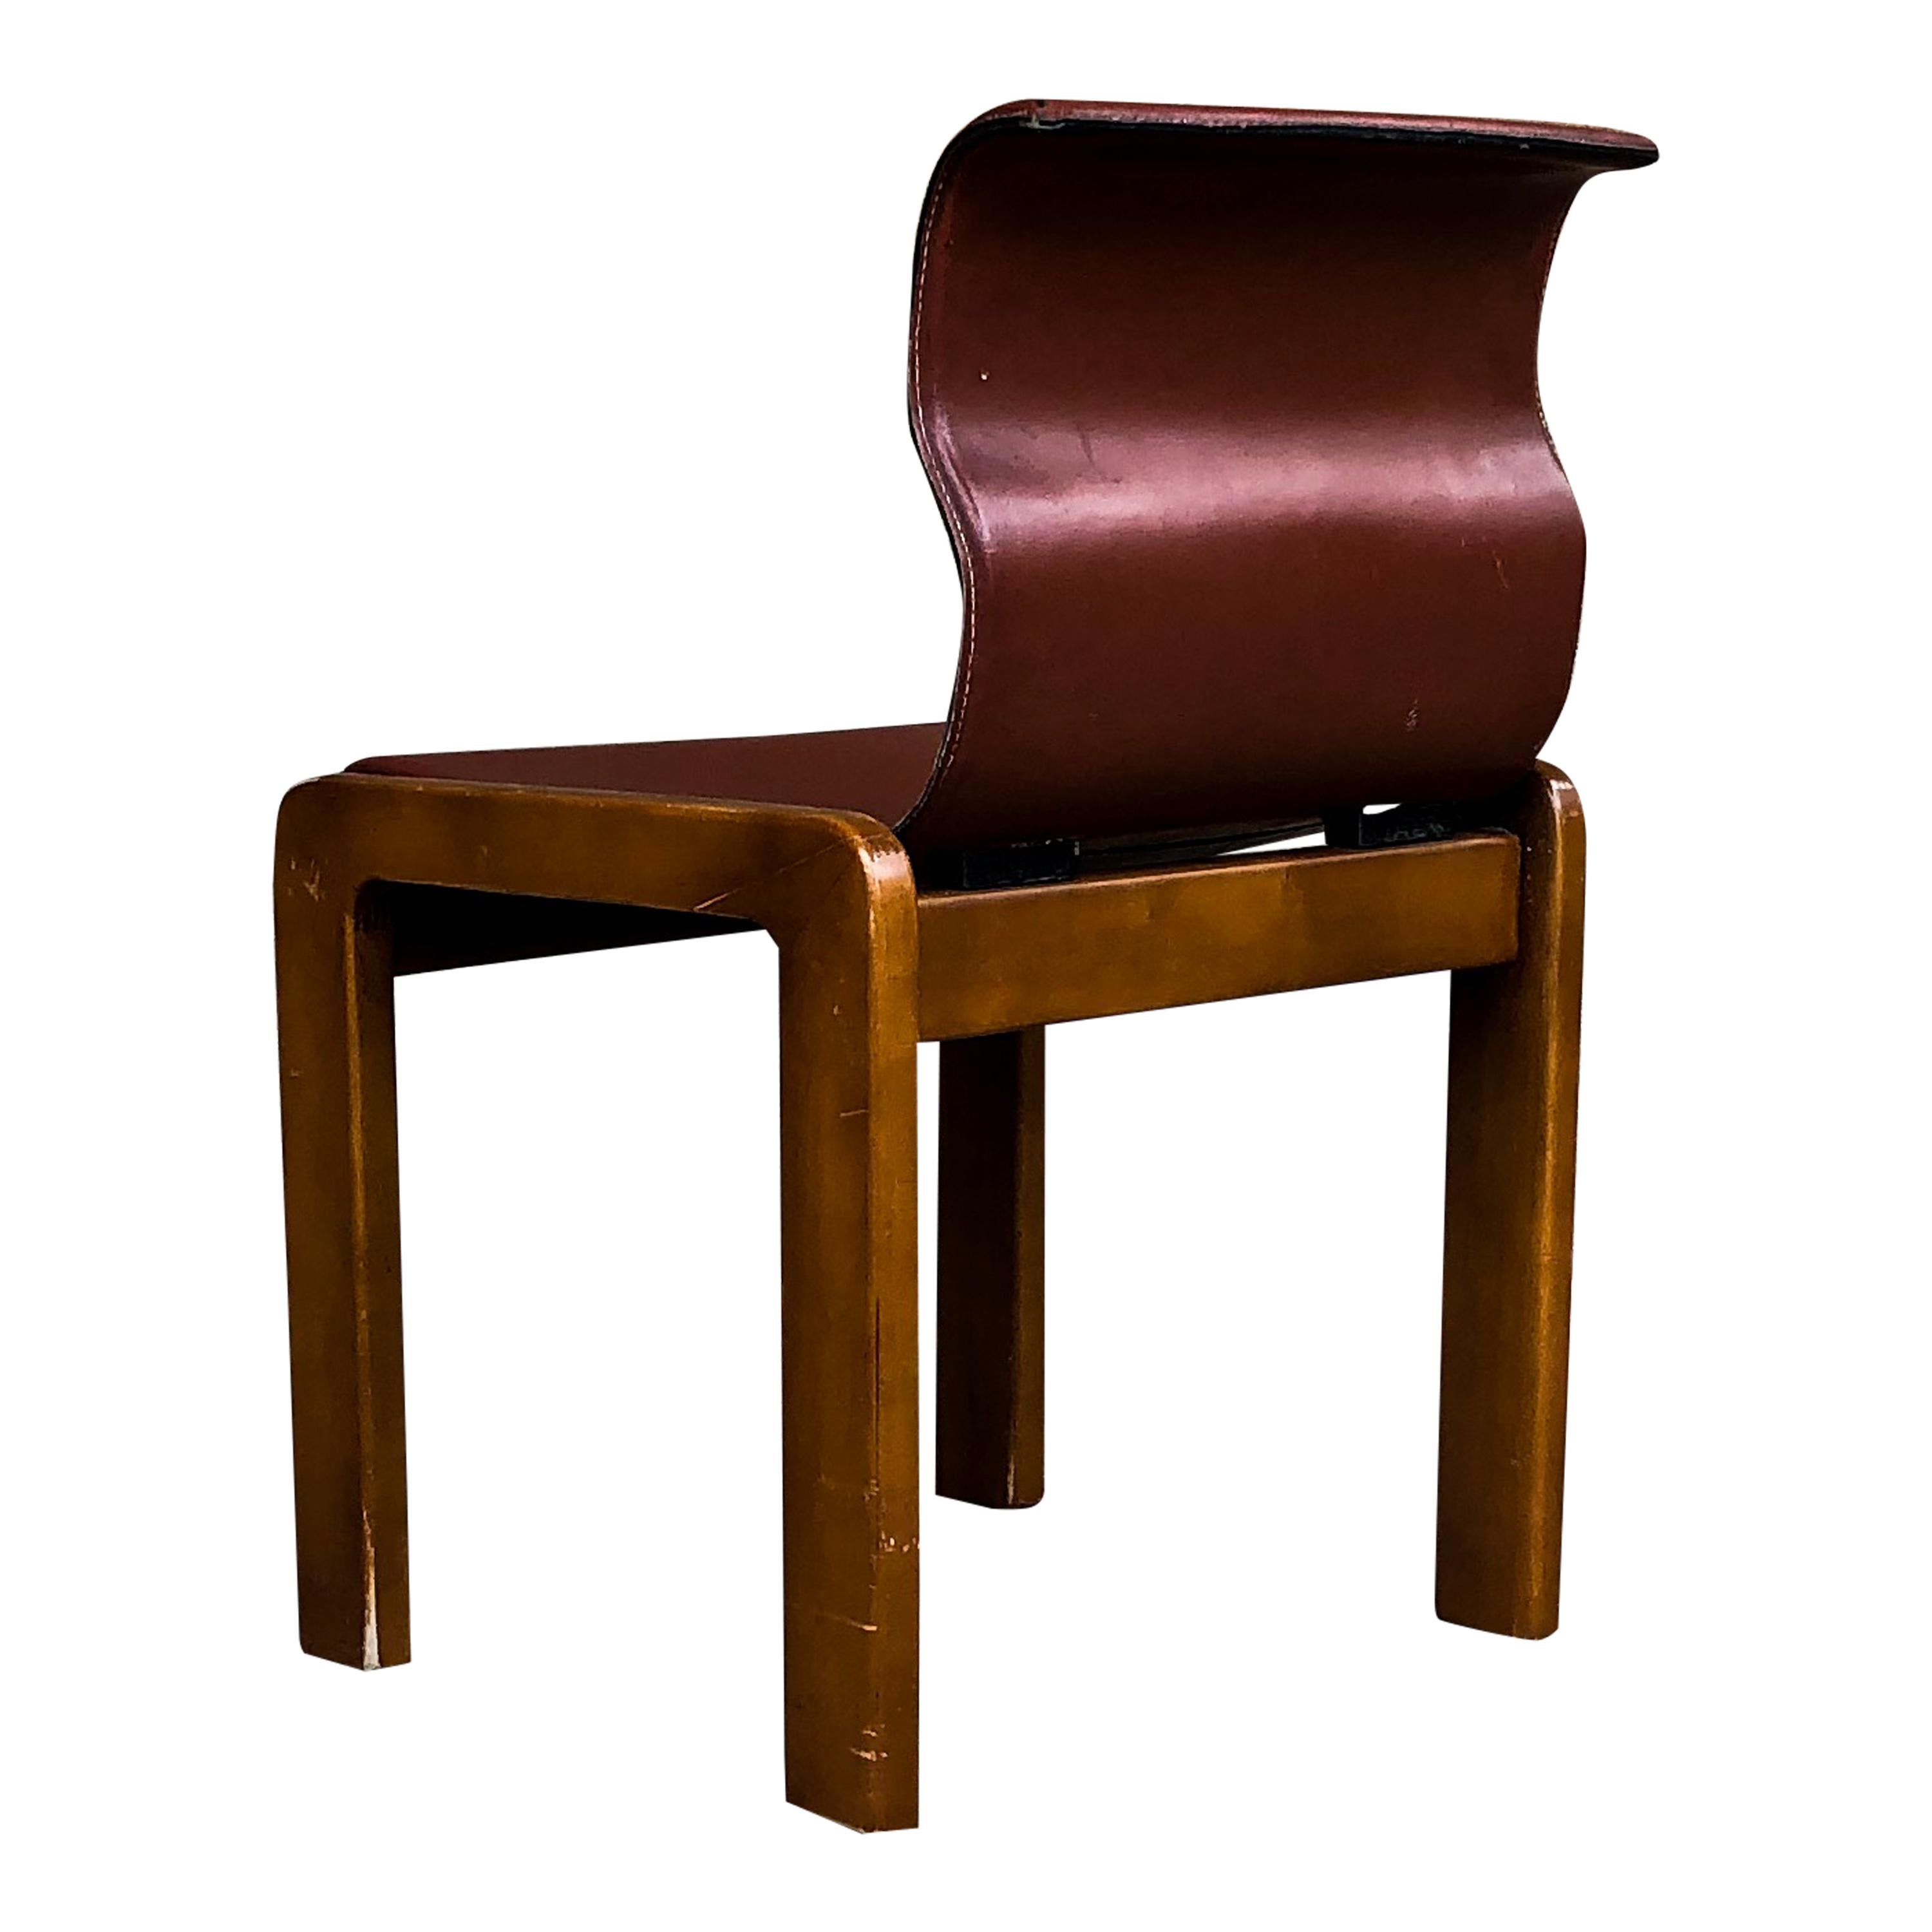 Afra & Tobia Scarpa Midcentury Leather and Plywood Dining Chair, 1966, Set of 4 For Sale 12